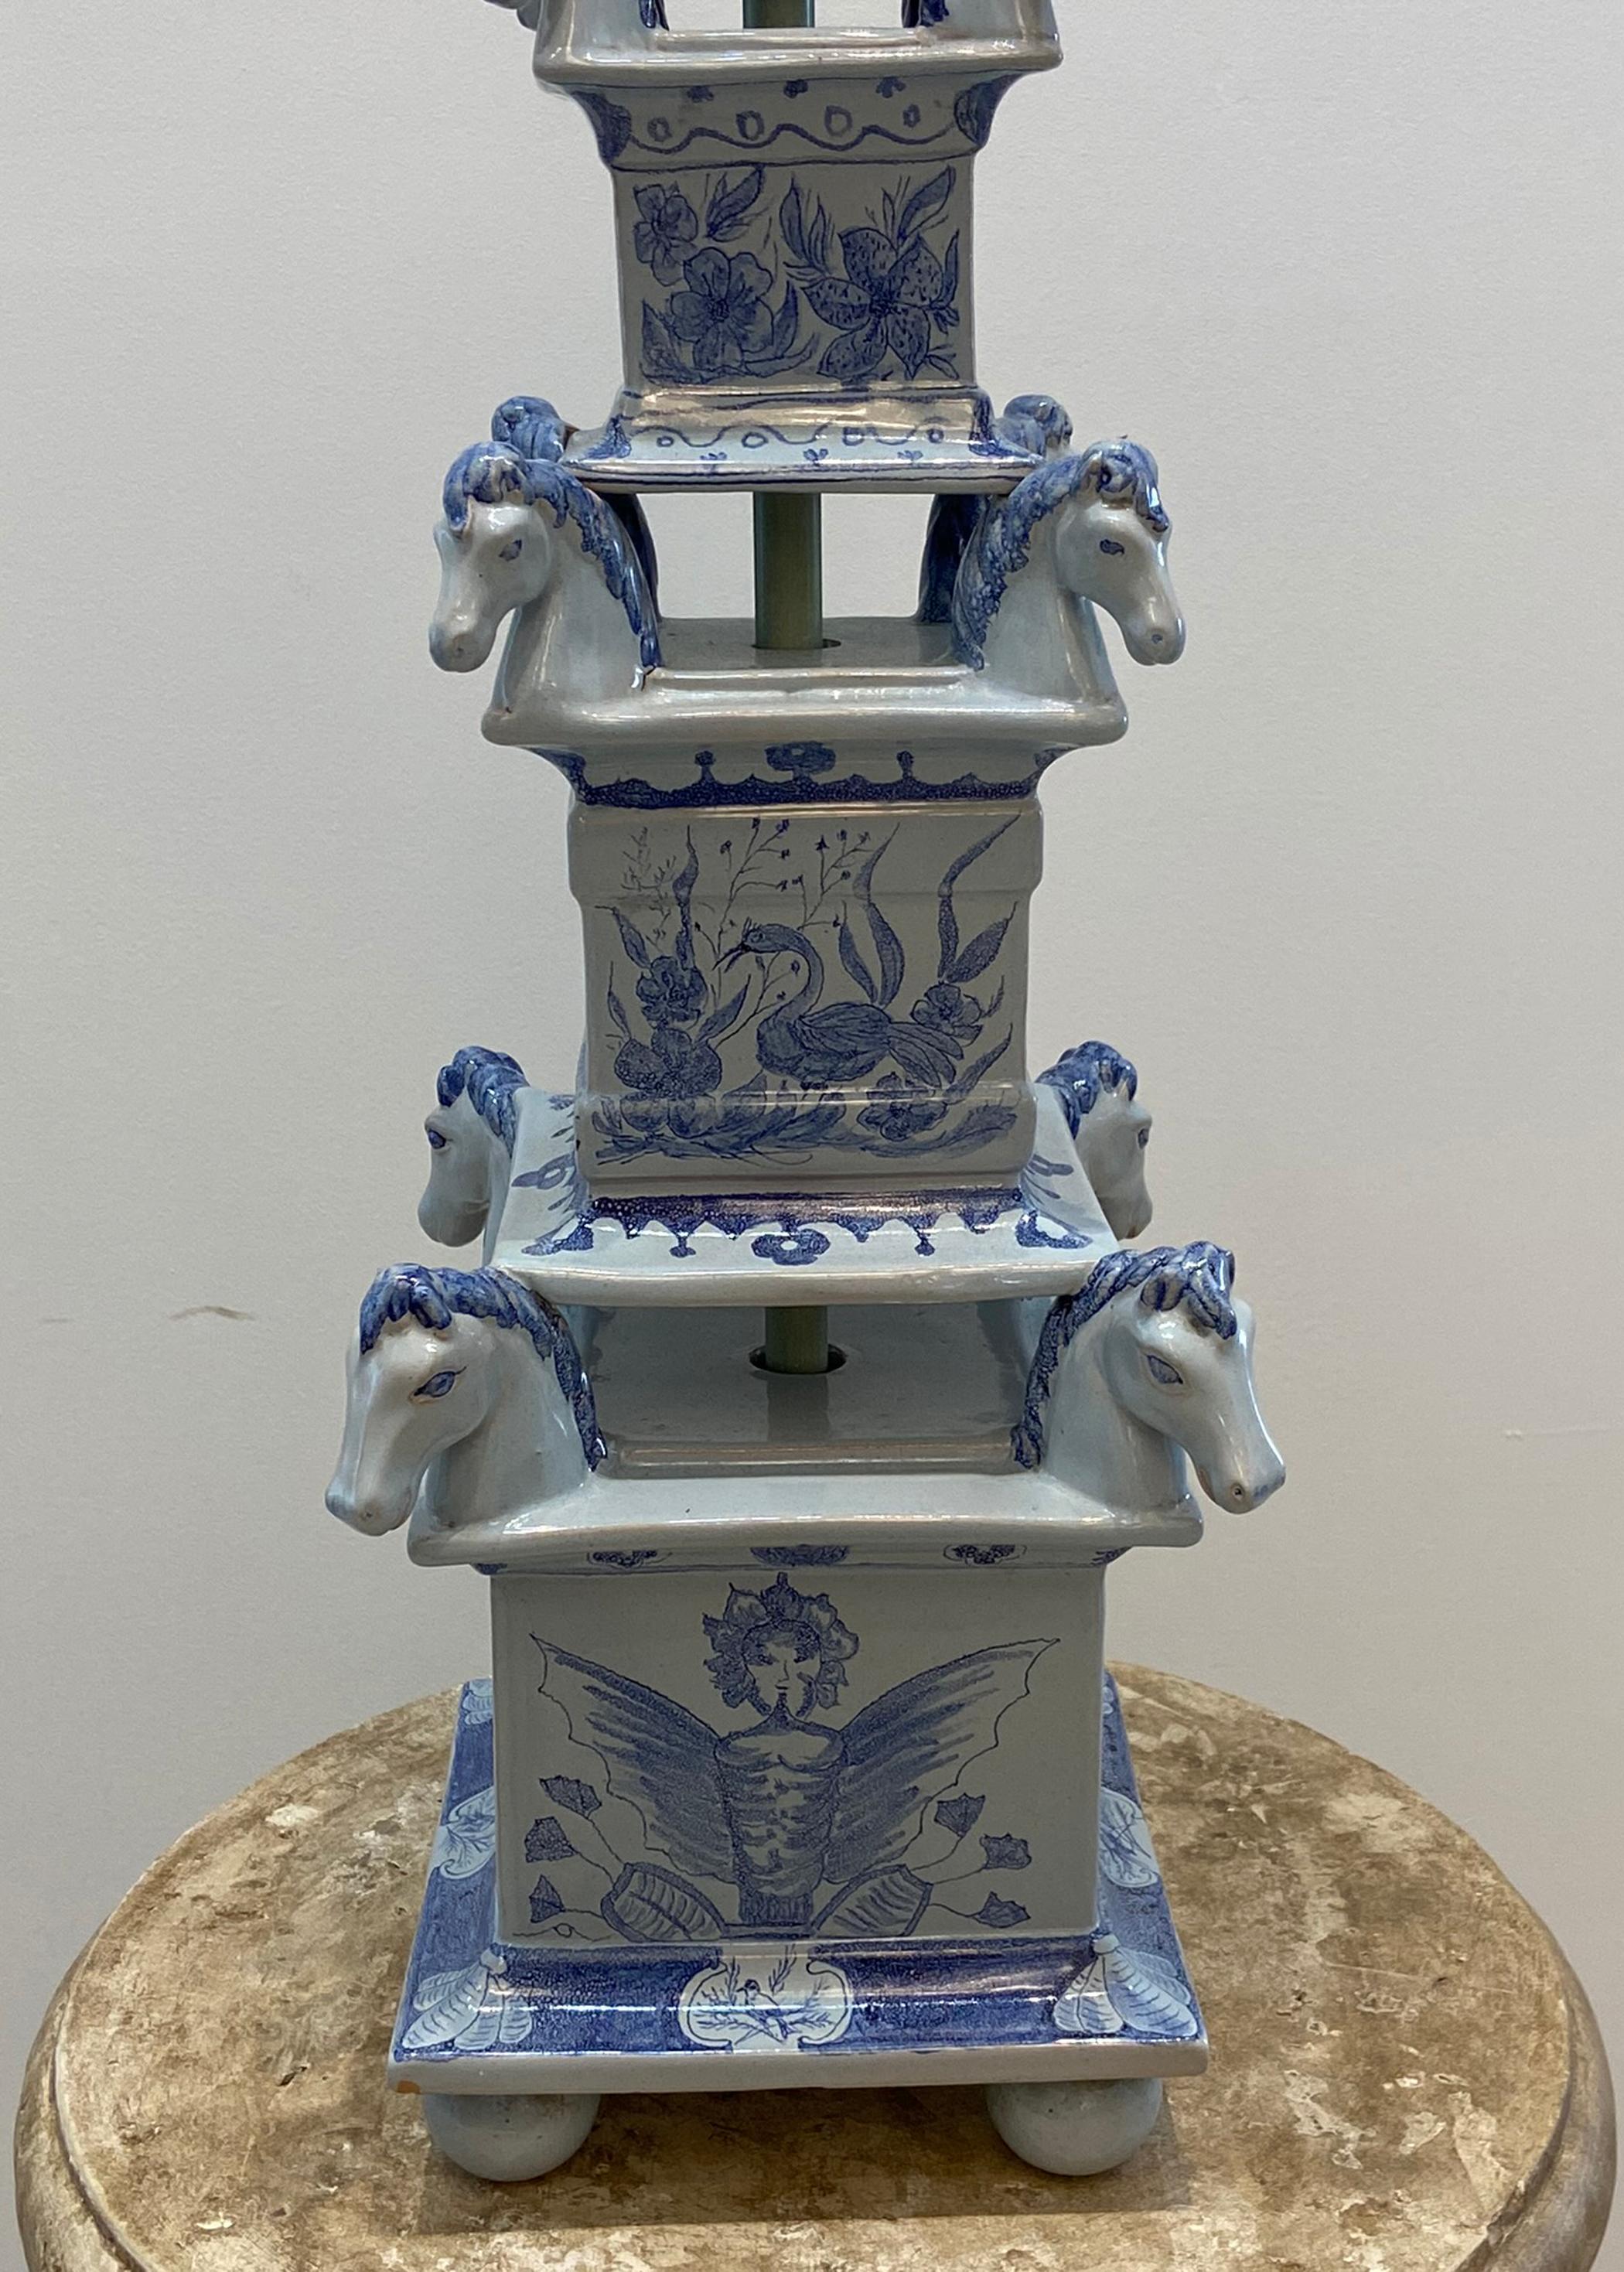 Vintage Asian style blue with white background horse head table lamp. Obelisk shaped with horse heads on each corner.